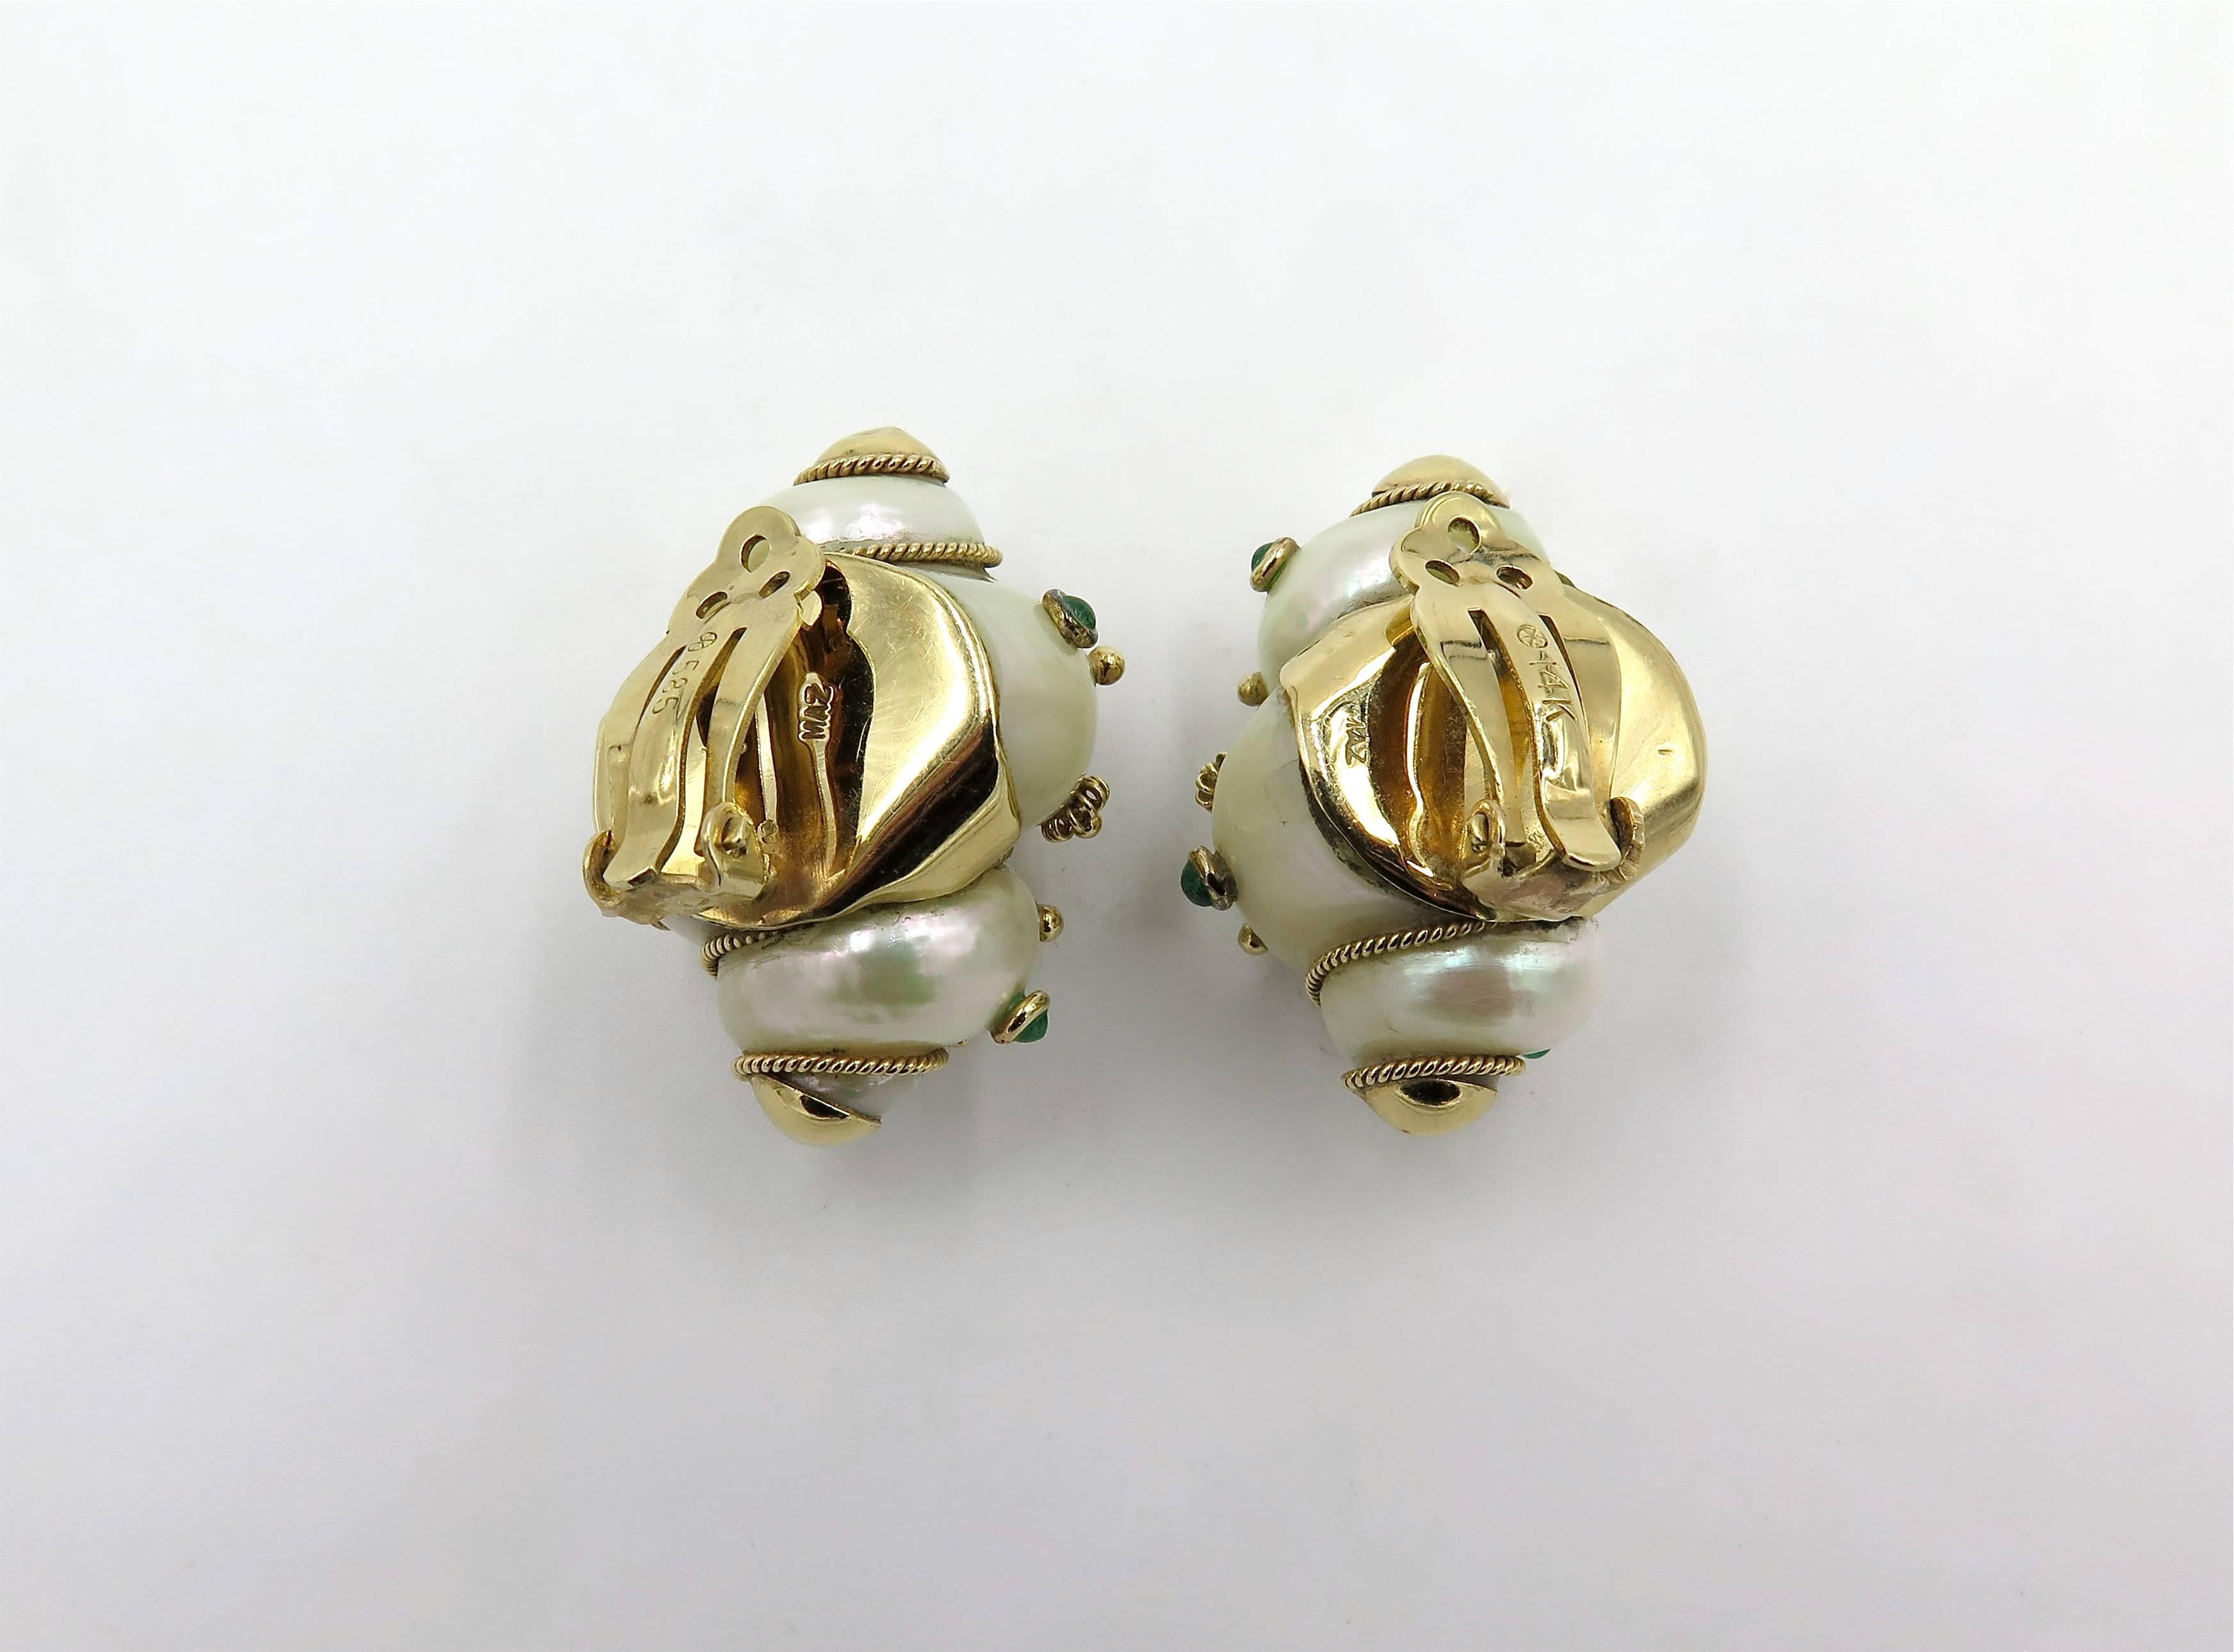 A pair of 14 karat yellow gold, shell and emerald earrings. Maz. Circa 1970. Each set with a white turbo shell, studded with cabochon emeralds and fluted gold beads, enhanced by gold rope work. Length is approximately 1 1/4 inches. Gross weight is